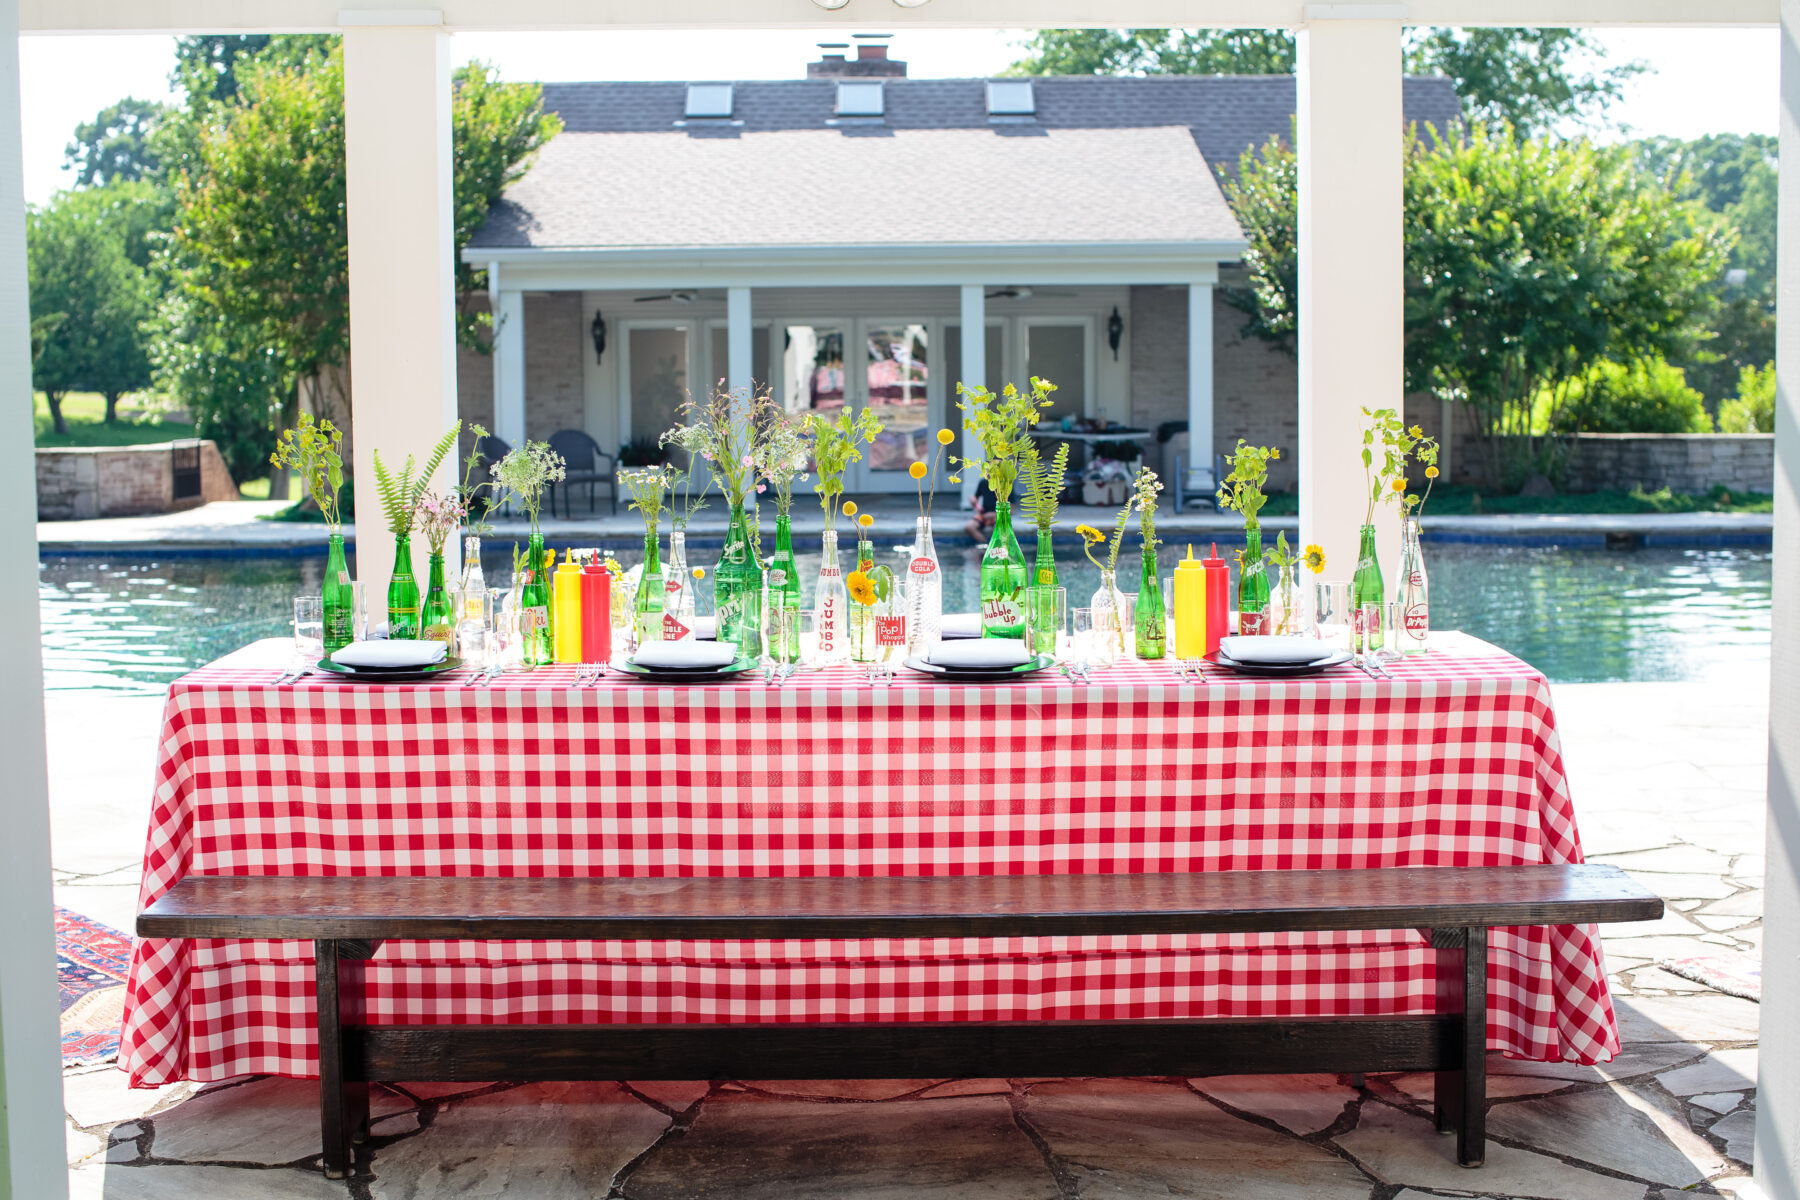 Father's Day Backyard Party Ideas from Southern Events featured on Nashville Baby Guide